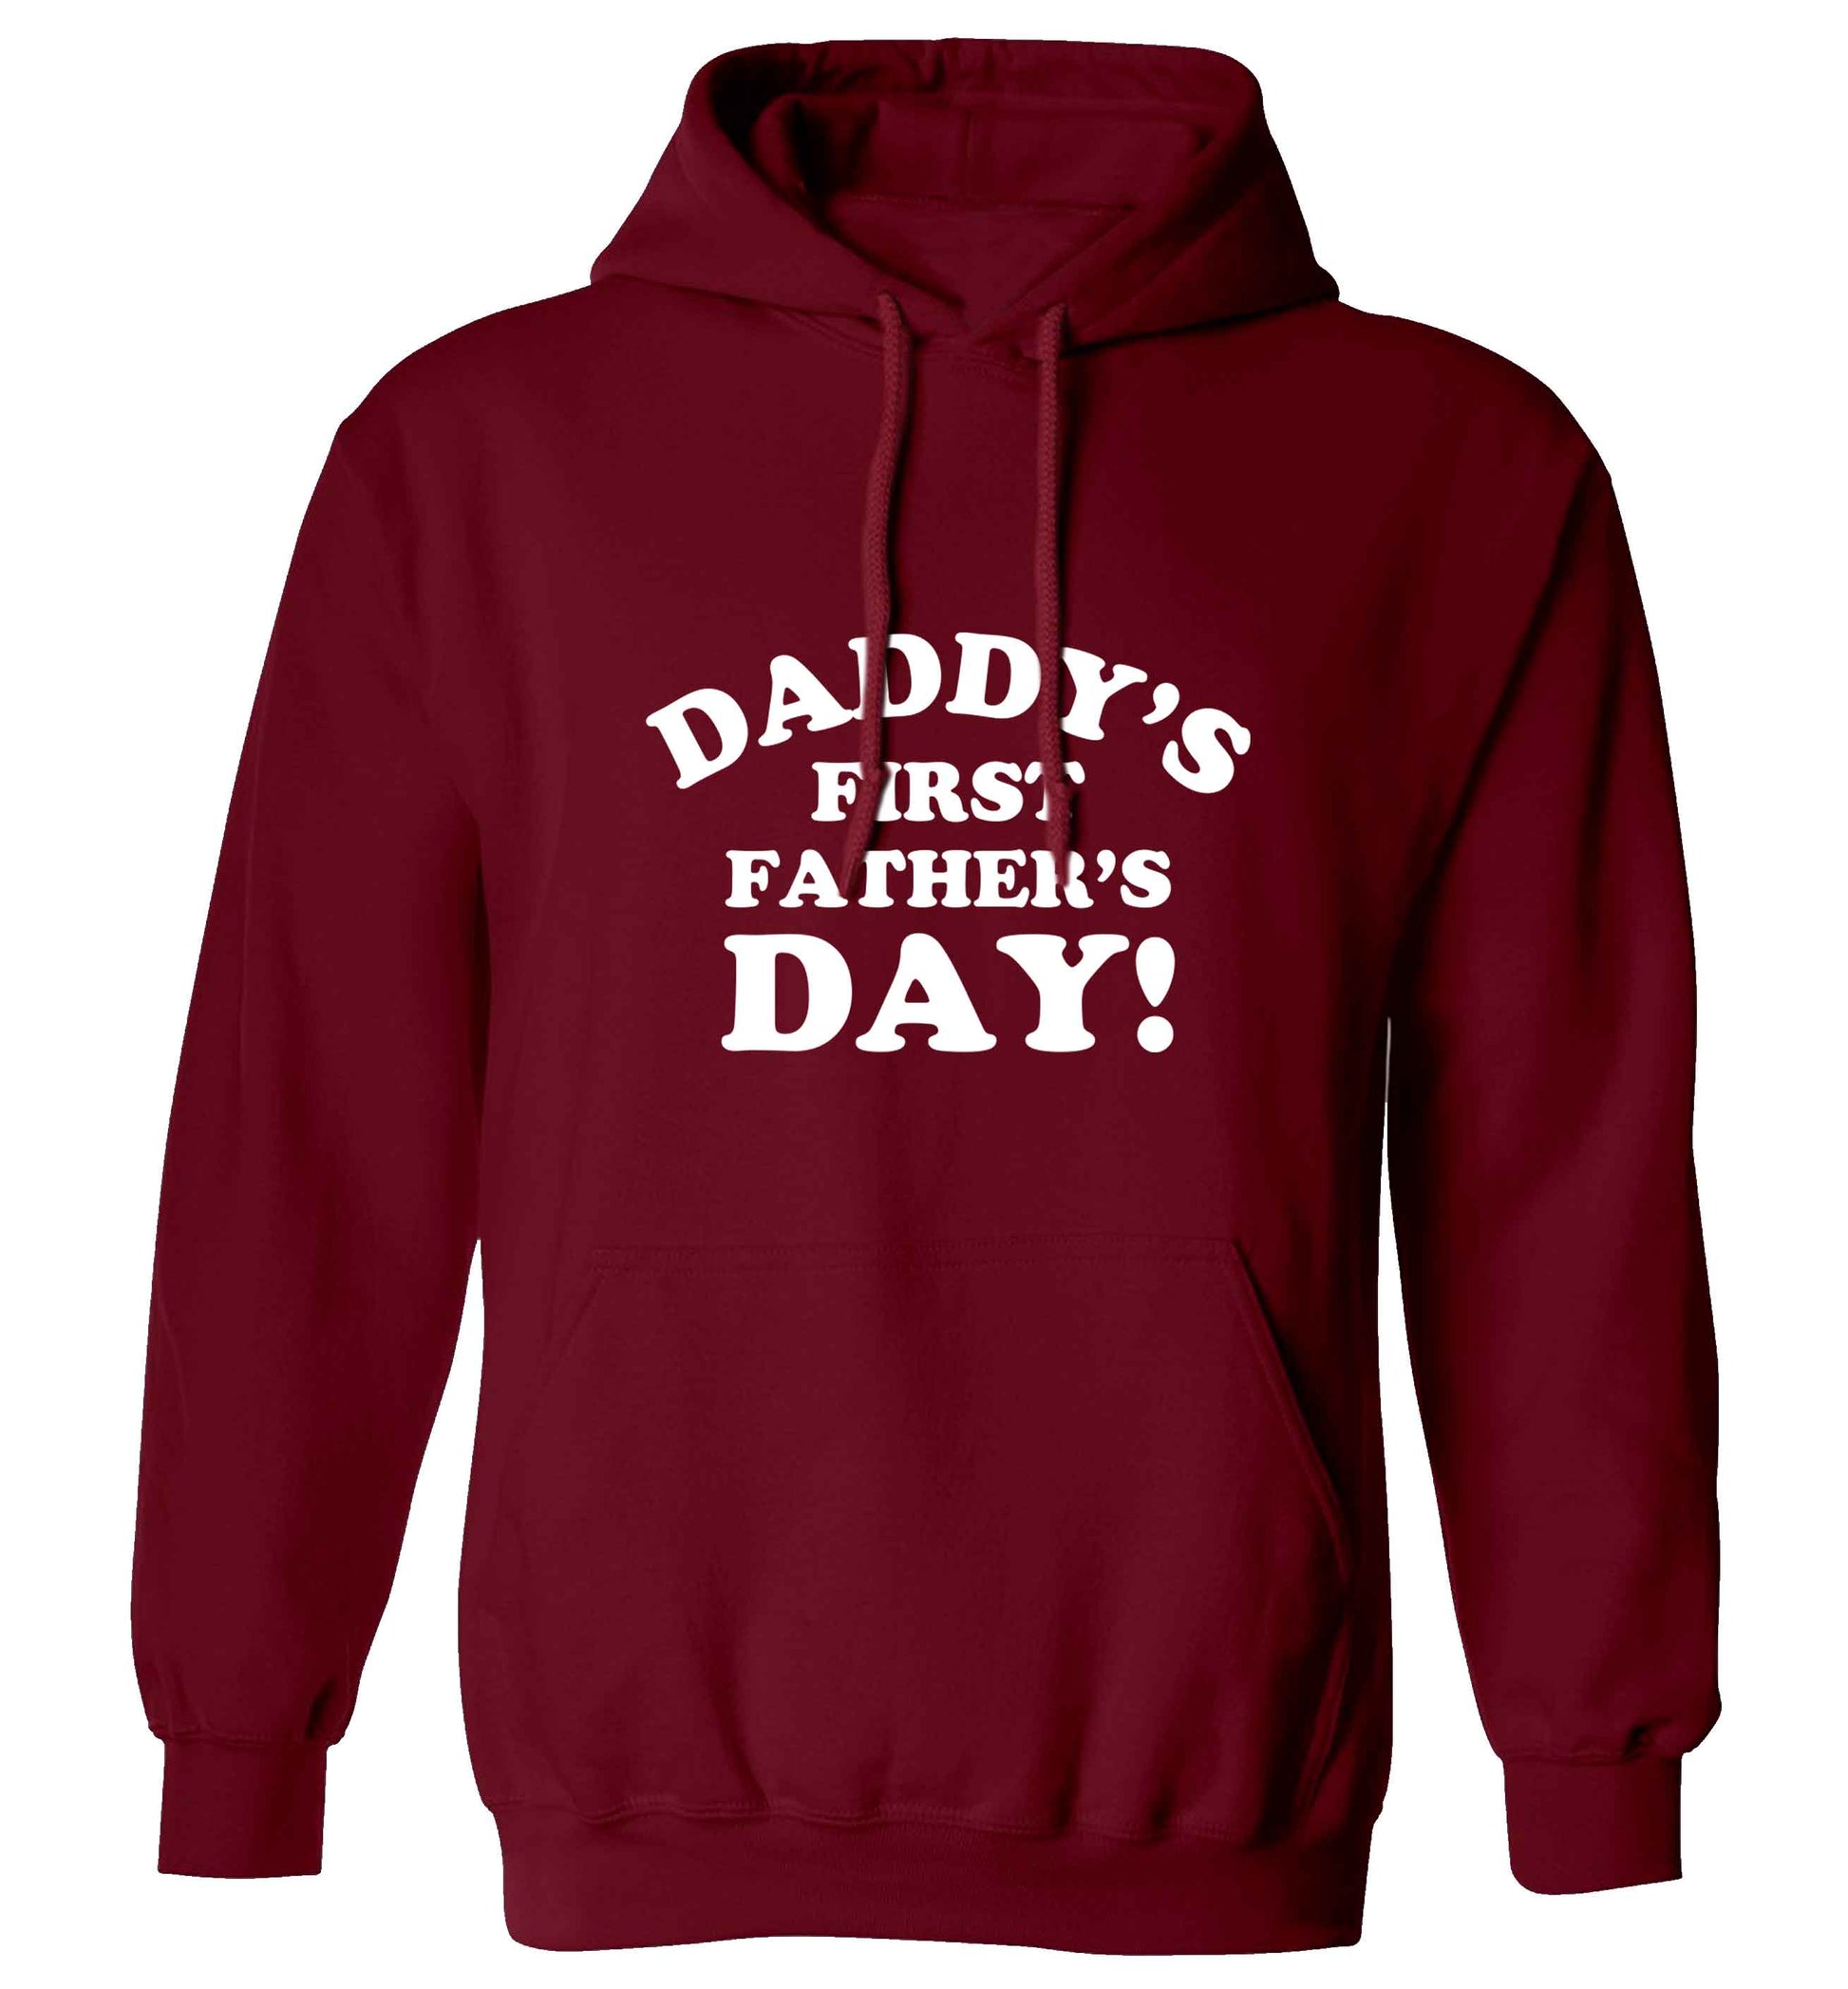 Daddy's first father's day adults unisex maroon hoodie 2XL